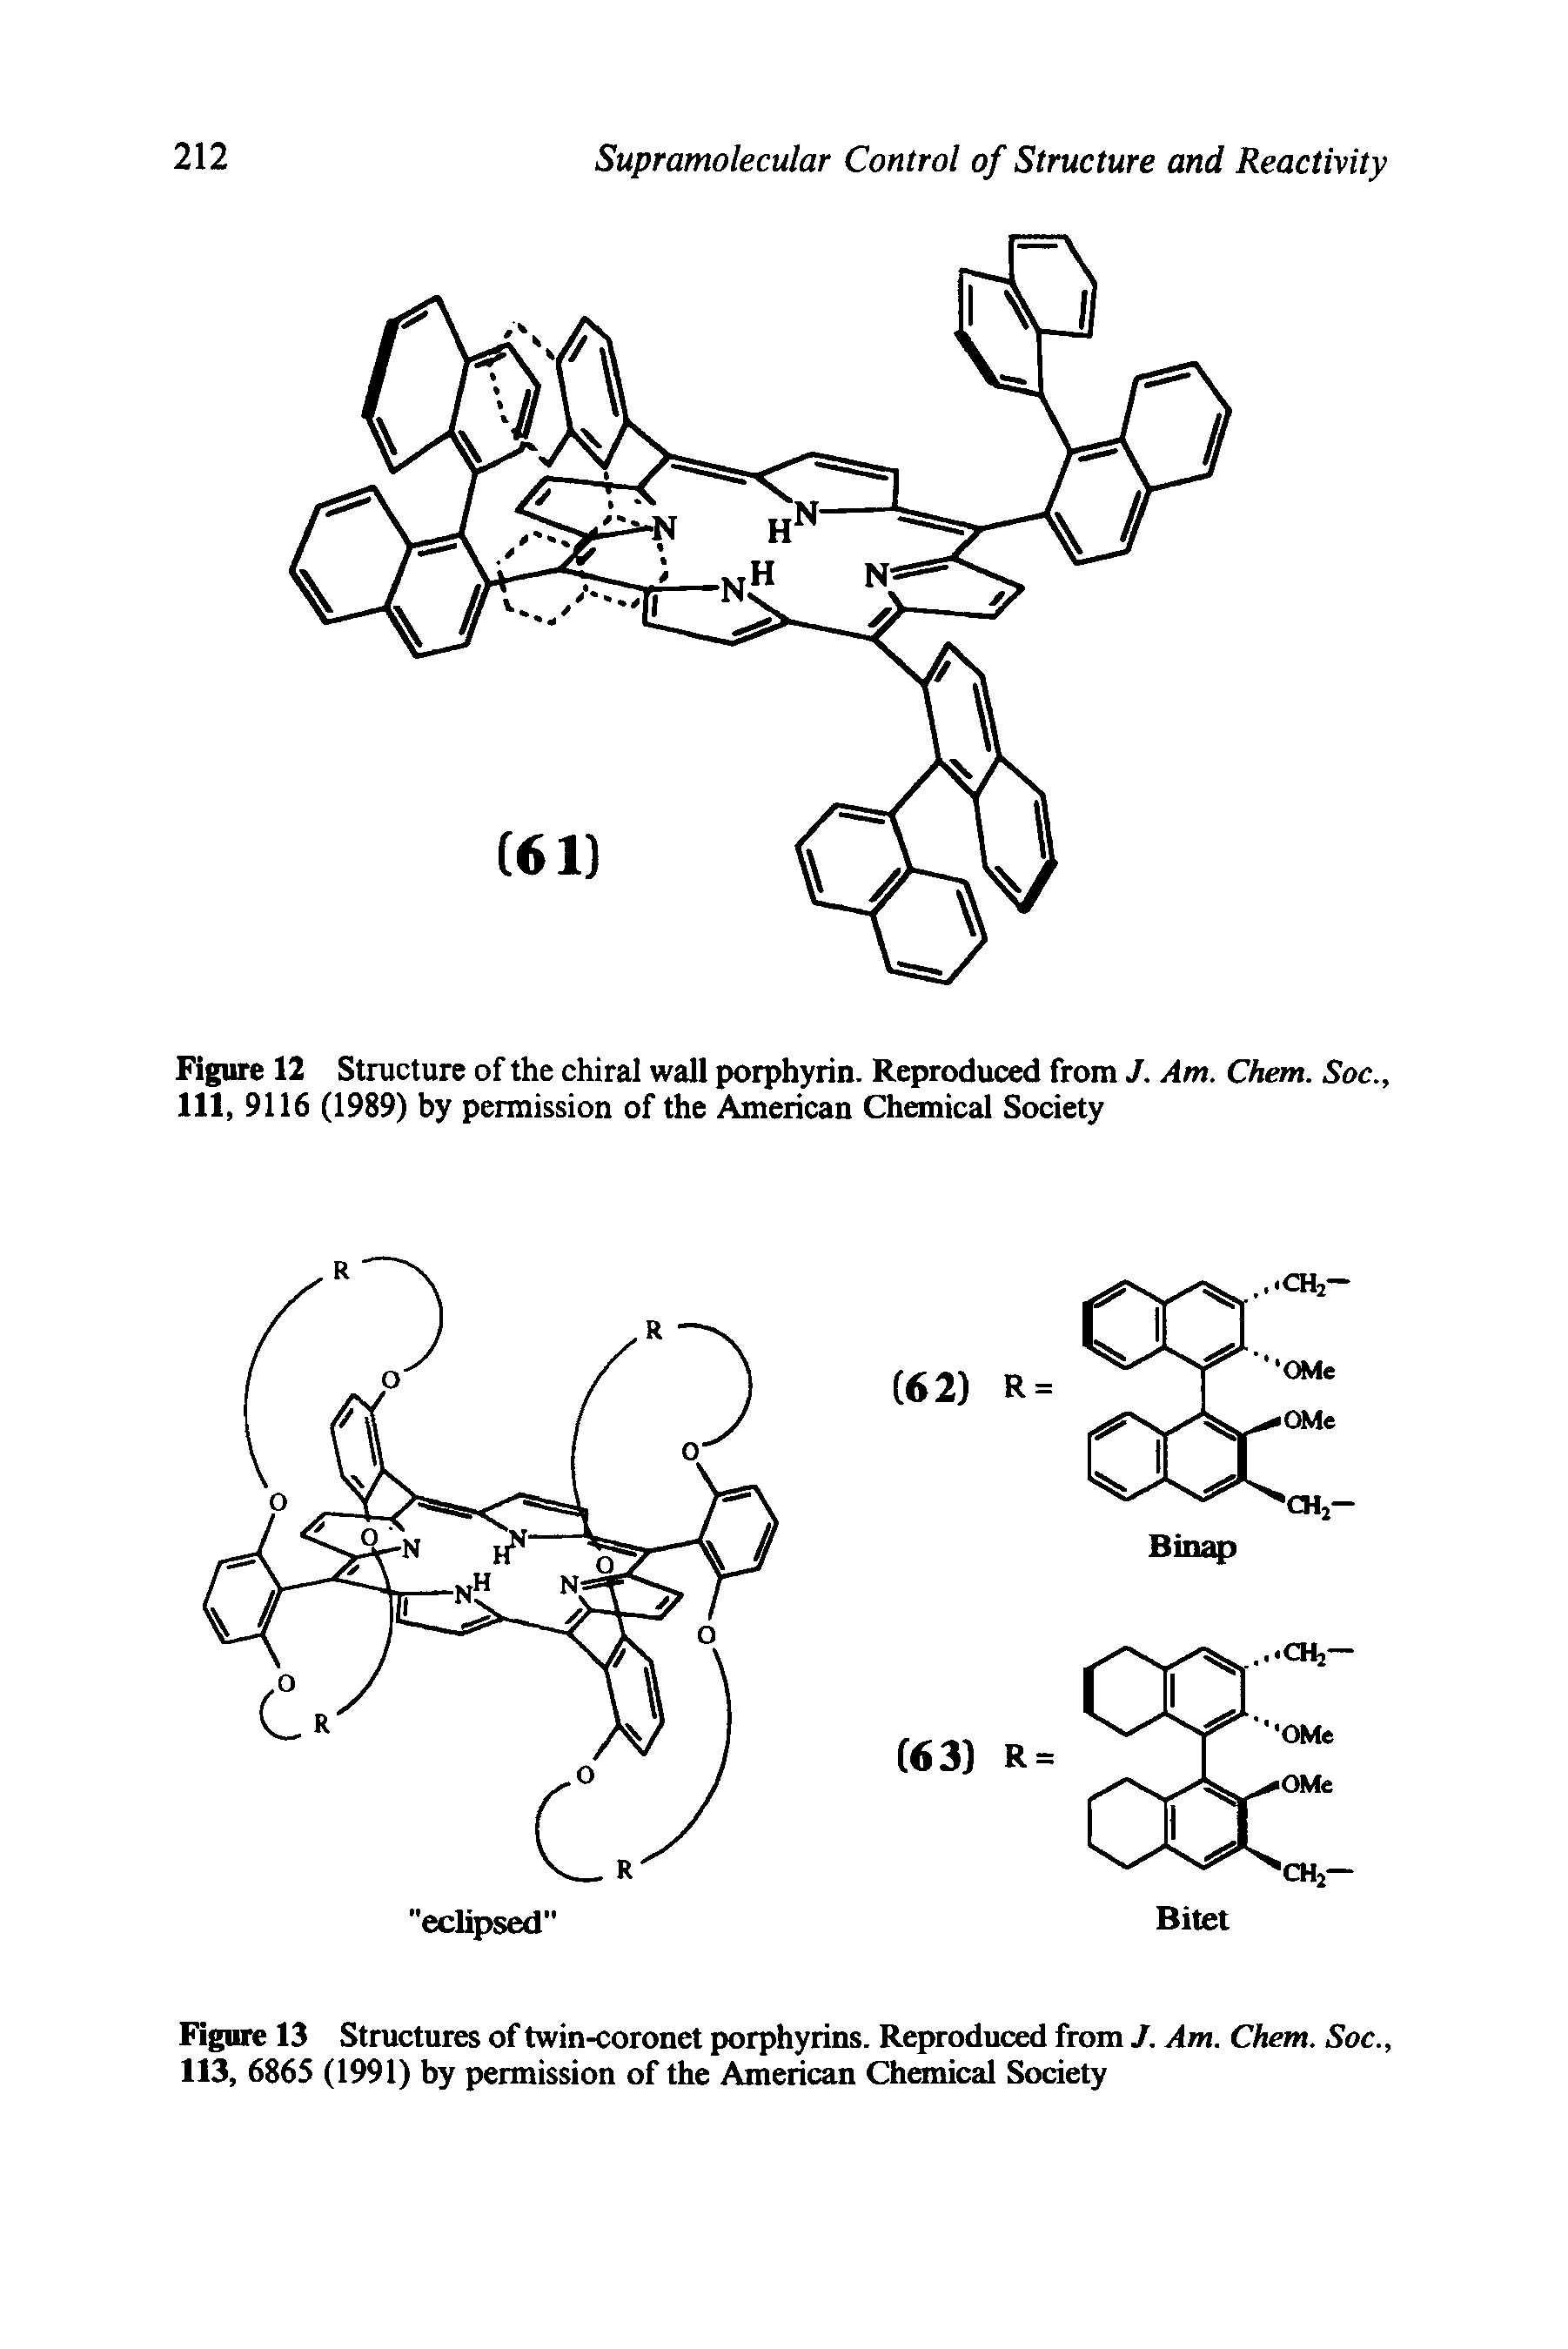 Figure 13 Structures of twin-coronet porphyrins. Reproduced from J. Am. Chem. Soc., 113, 6865 (1991) by permission of the American Chemical Society...